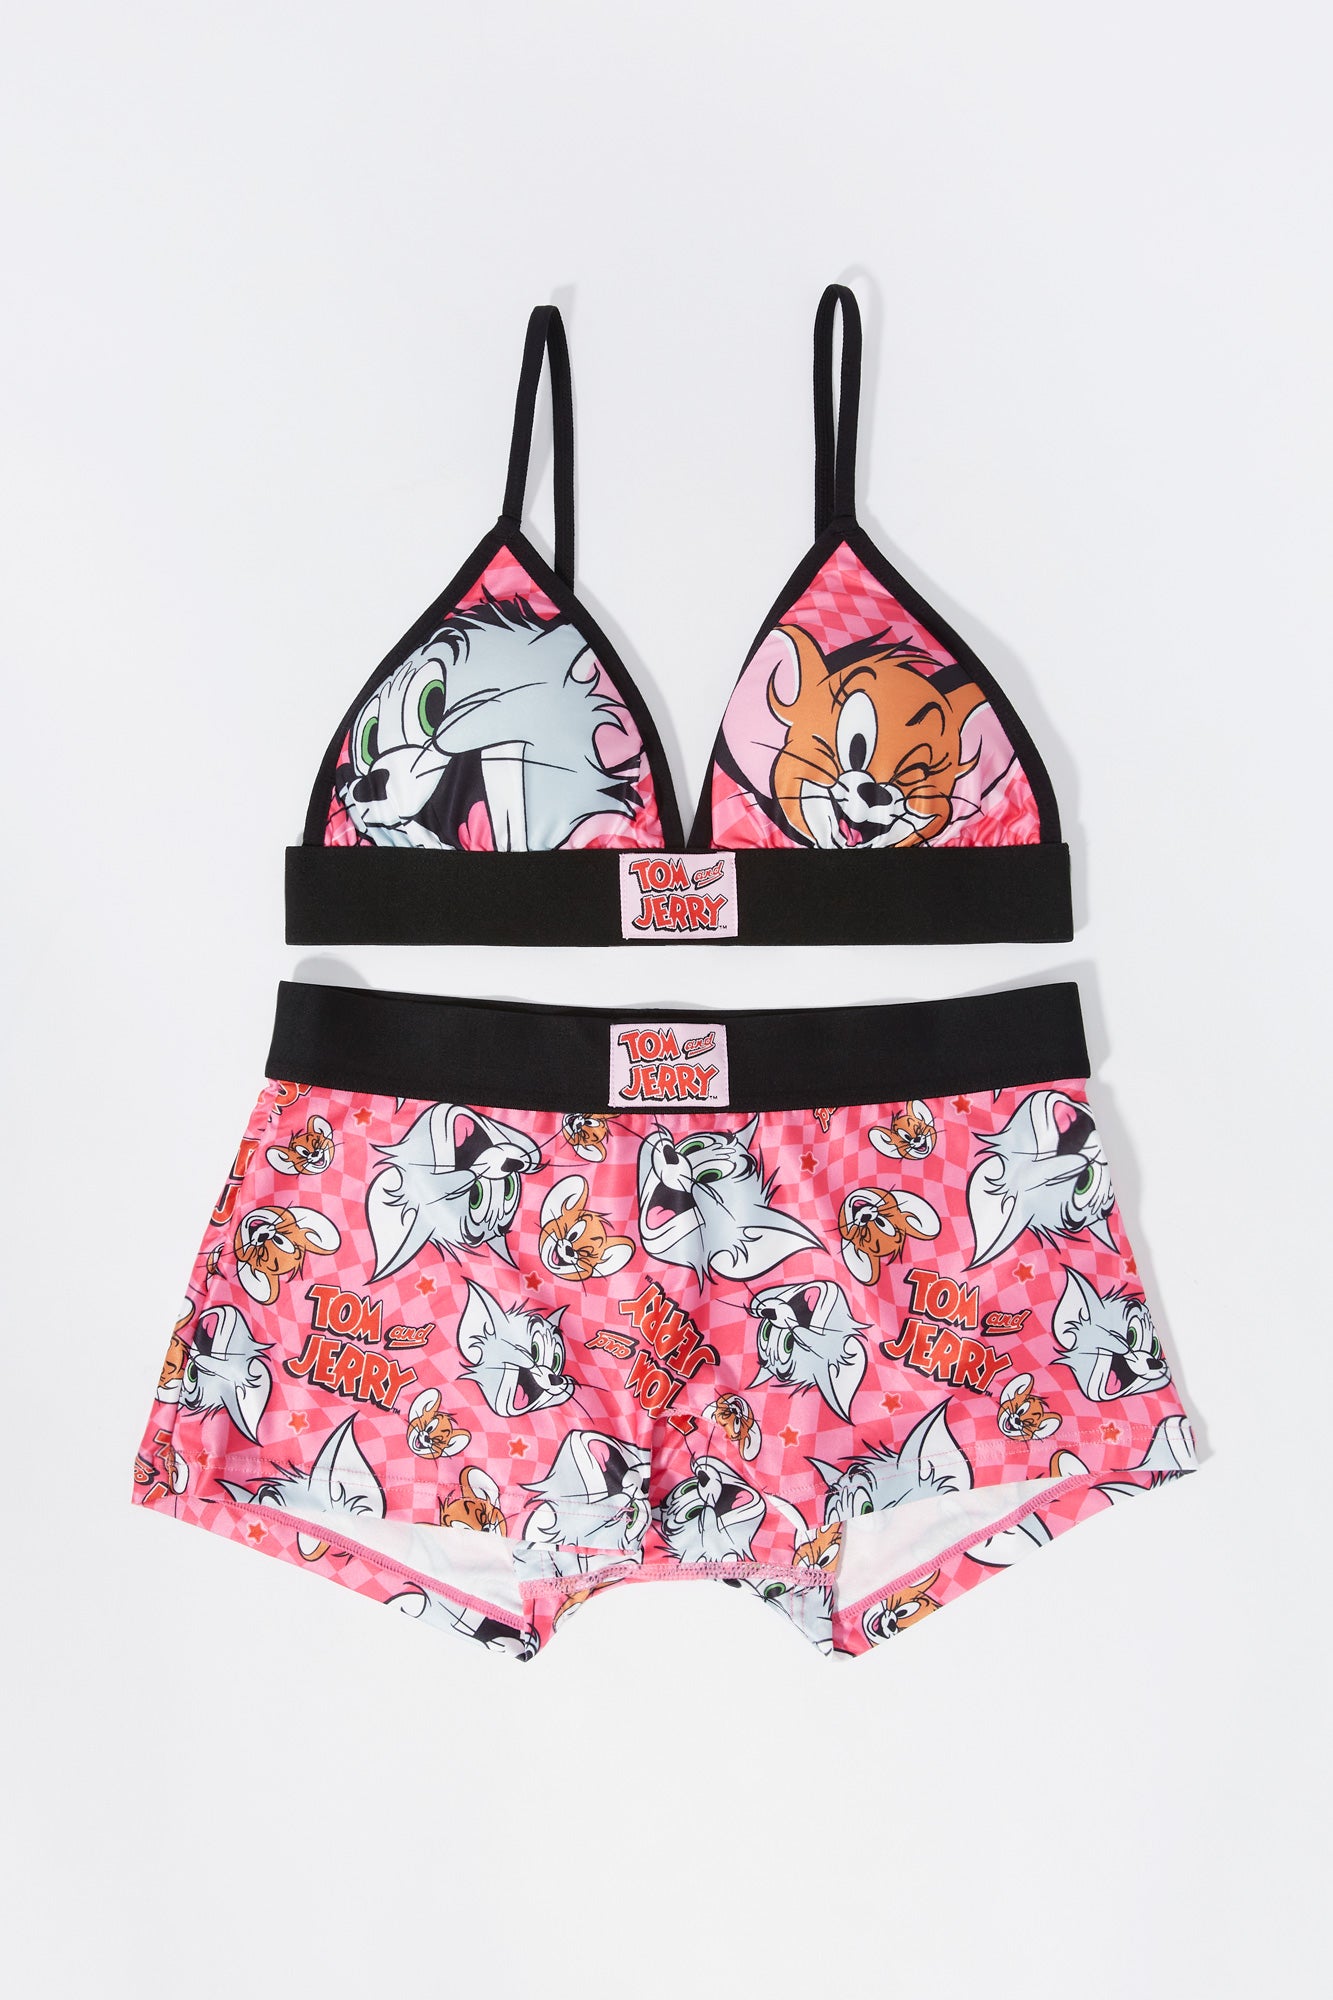 COCO BRANDS Tom and Jerry Women's Sports Bra and Boxer Briefs